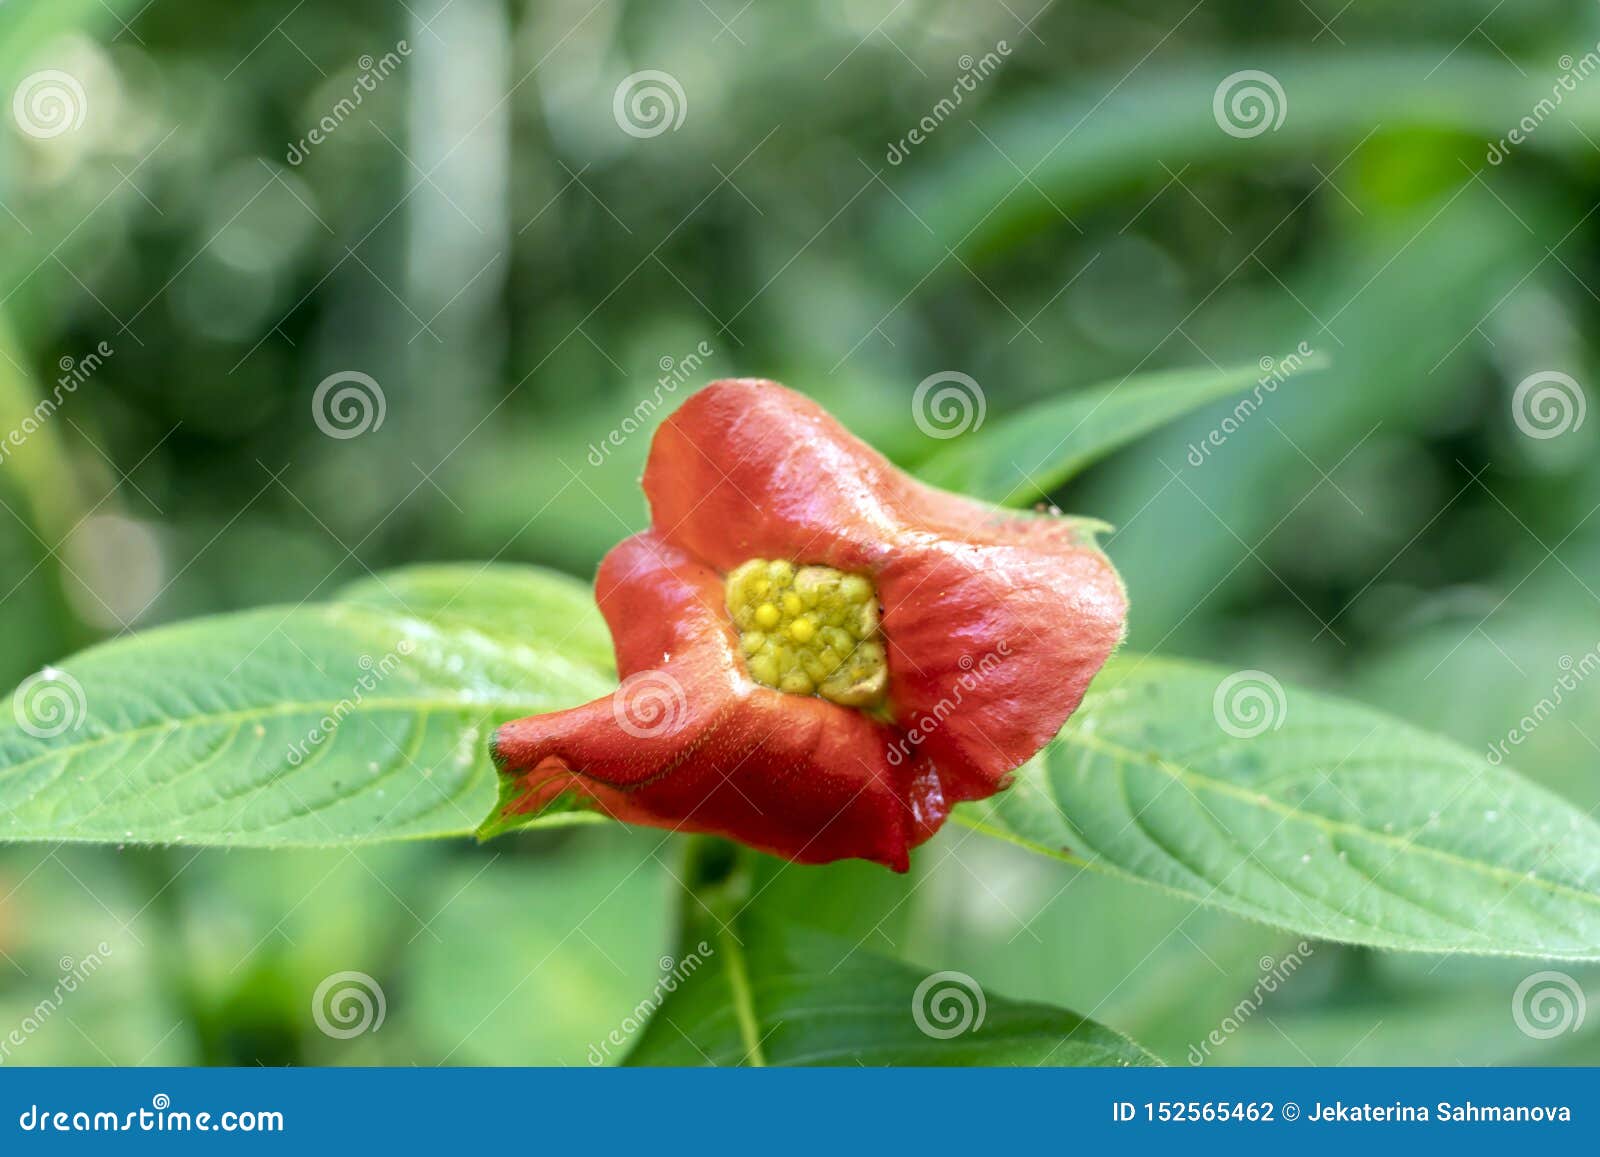 blurred nature background with red tropical flower : hot lips flower, psychotria poeppigiana